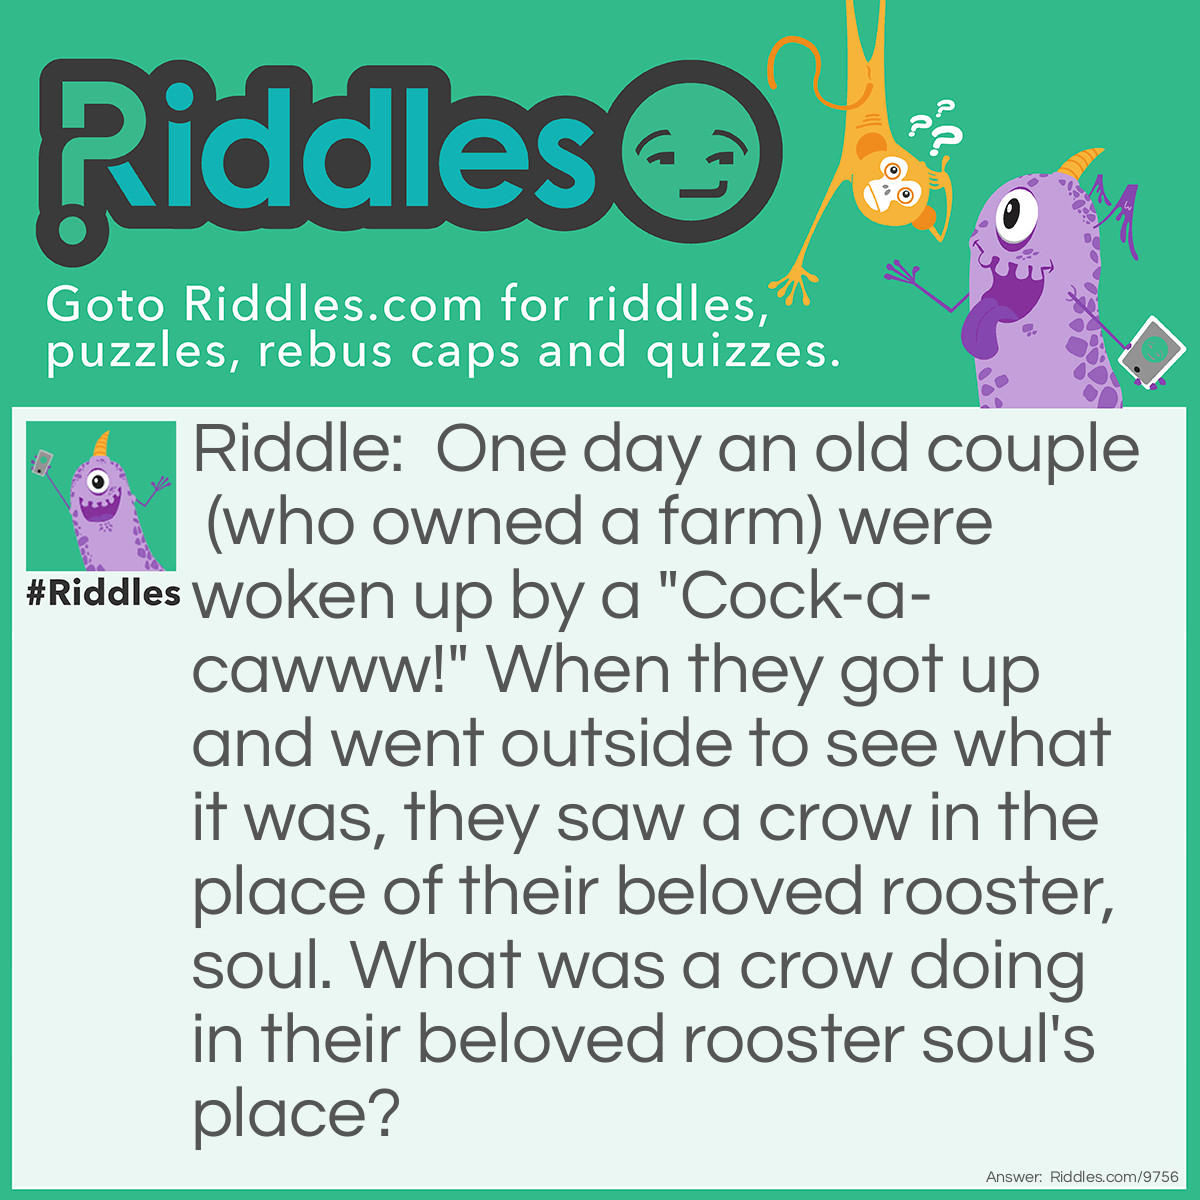 Riddle: One day an old couple (who owned a farm) were woken up by a "Cock-a-cawww!" When they got up and went outside to see what it was, they saw a crow in the place of their beloved rooster, soul. What was a crow doing in their beloved rooster soul's place? Answer: Because the rooster went on a holiday with his soul-mate and left the crow in charge of his job, to cock-a-doodle-doo at the farm instead of the rooster himself